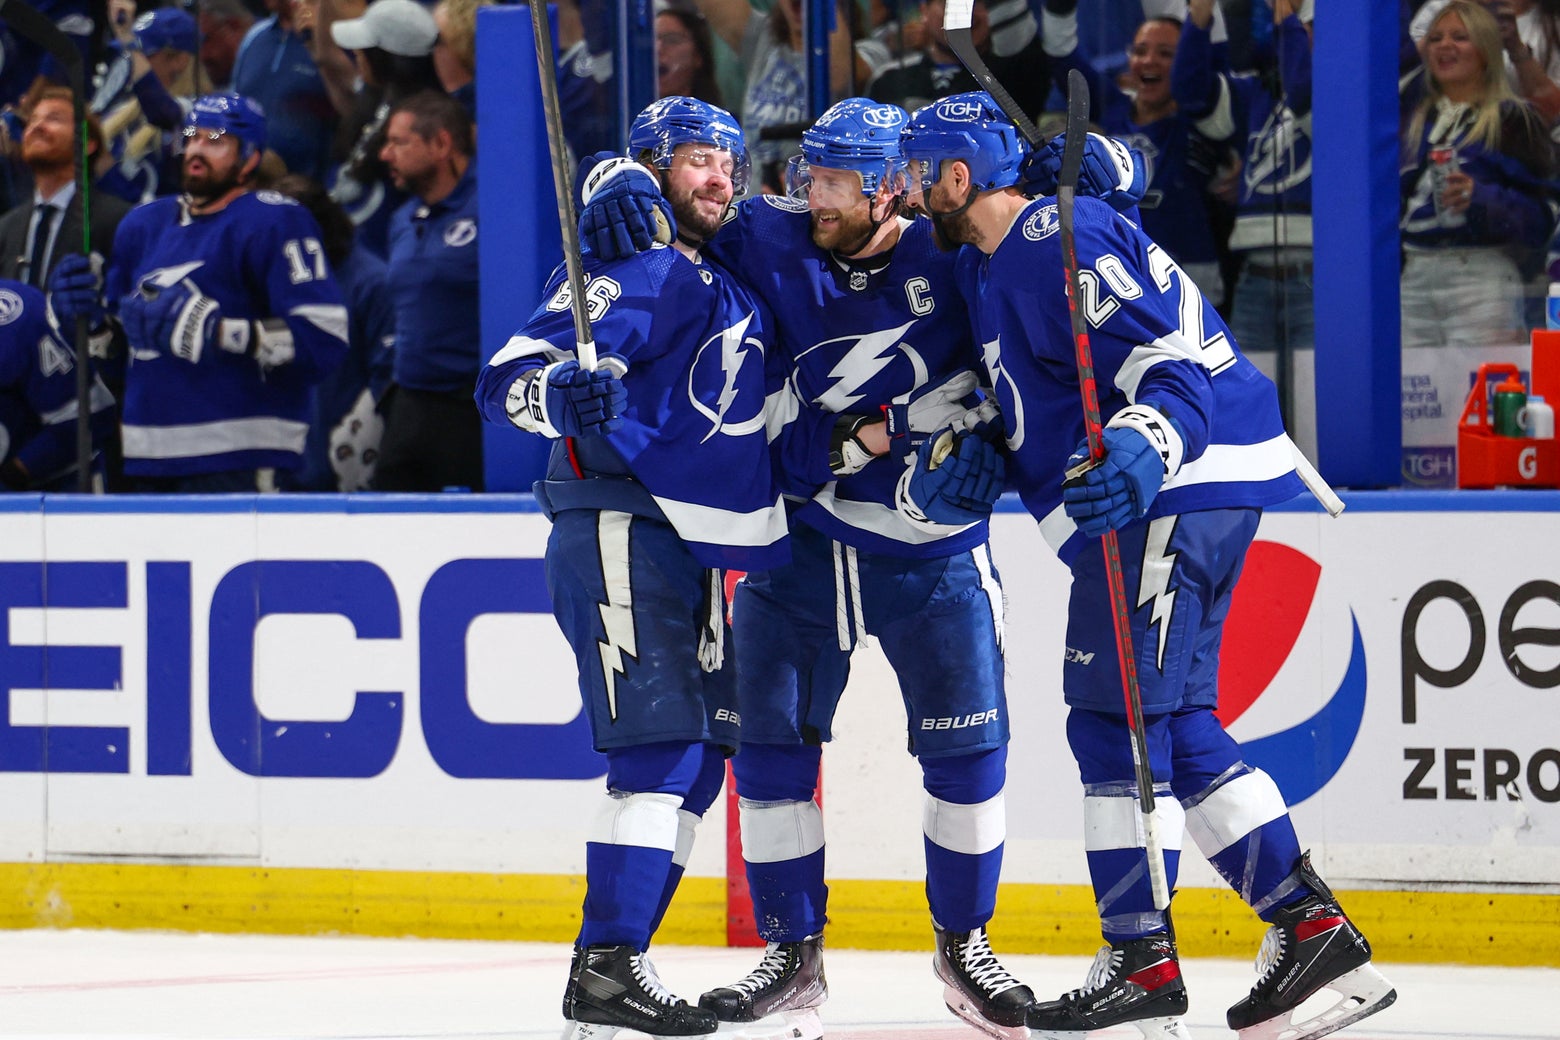 The Lightning is fun, but does its playoff run translate into dollars for  Tampa?